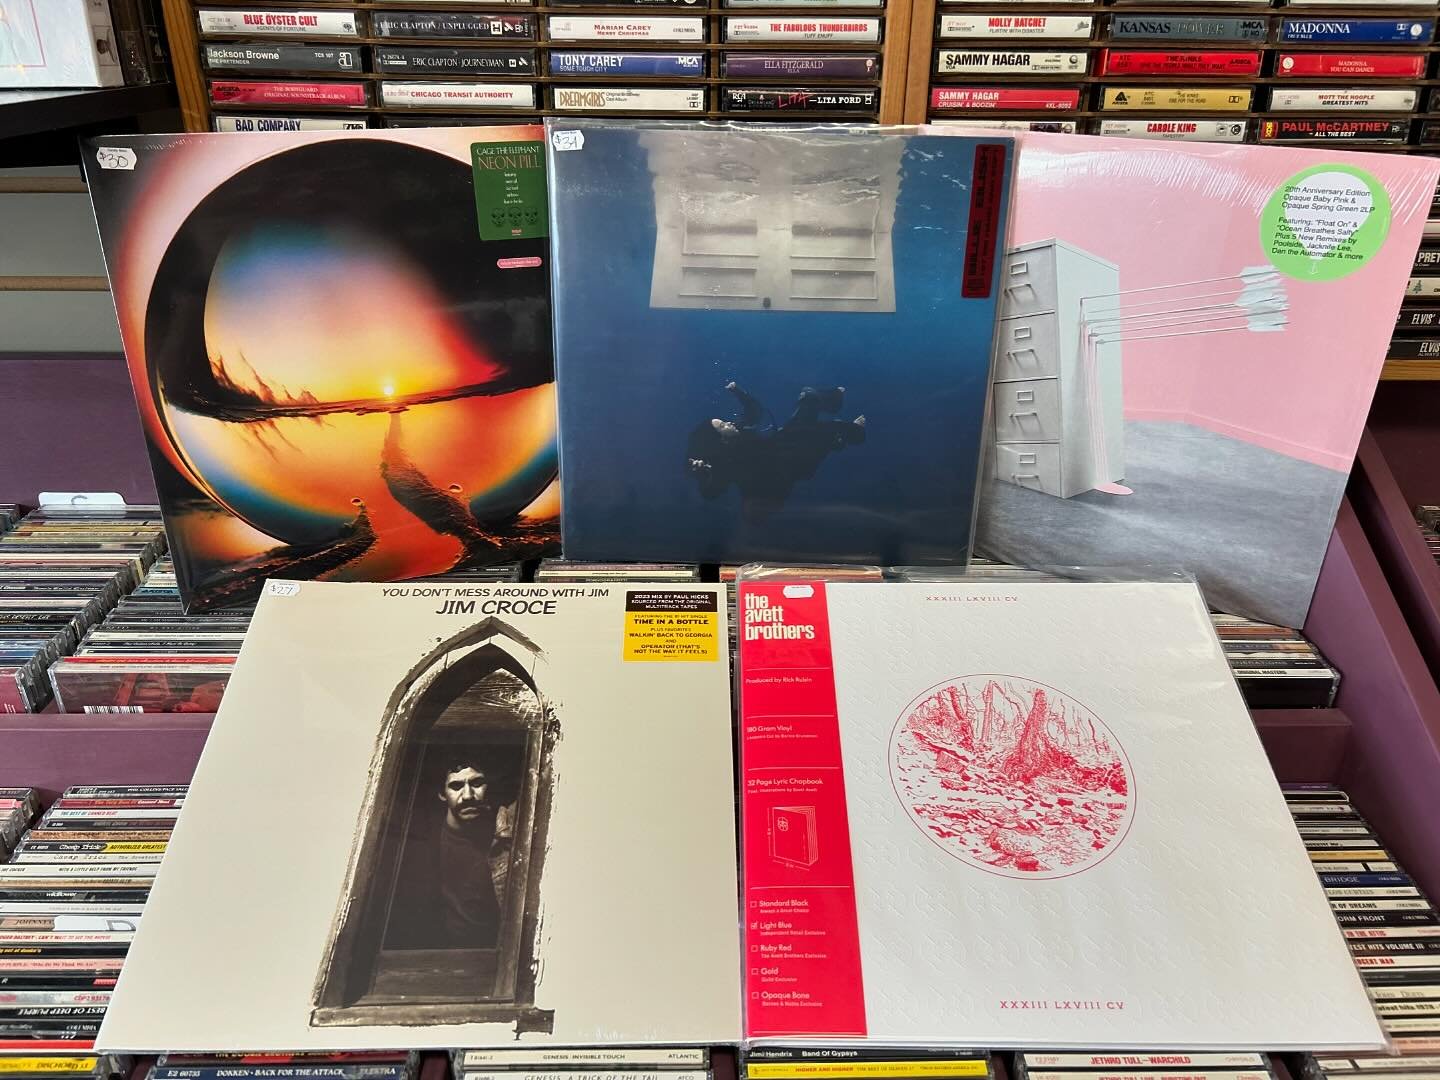 Some of today&rsquo;s new arrivals - new @billieeilish @cagetheelephant here till 7pm tonight! #billieeilish #cagetheelephant #modestmouse #kerryking #avettbrothers #charliexcx #genesis #jimcroce #indierecordstore #localmusicstore #shoplocal #supoort